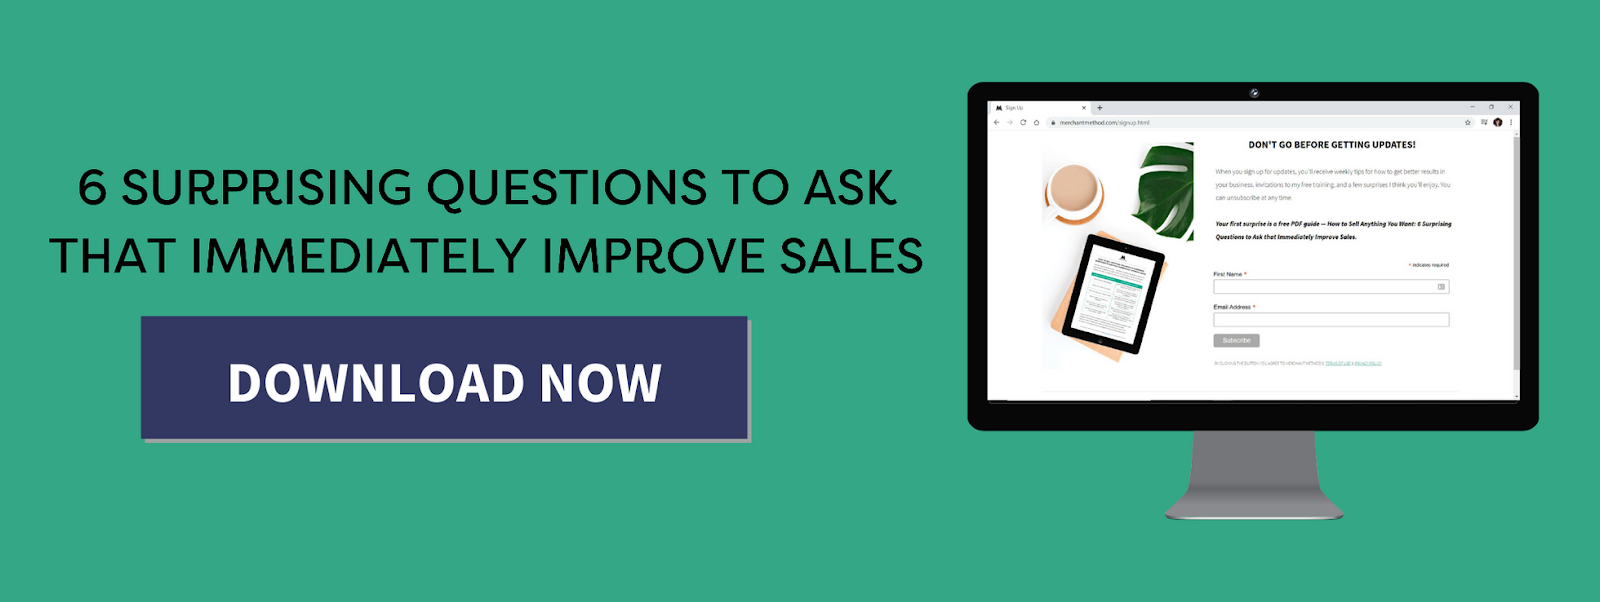 Download 6 Surprising Questions to Ask to Immediately Improve Sales now.